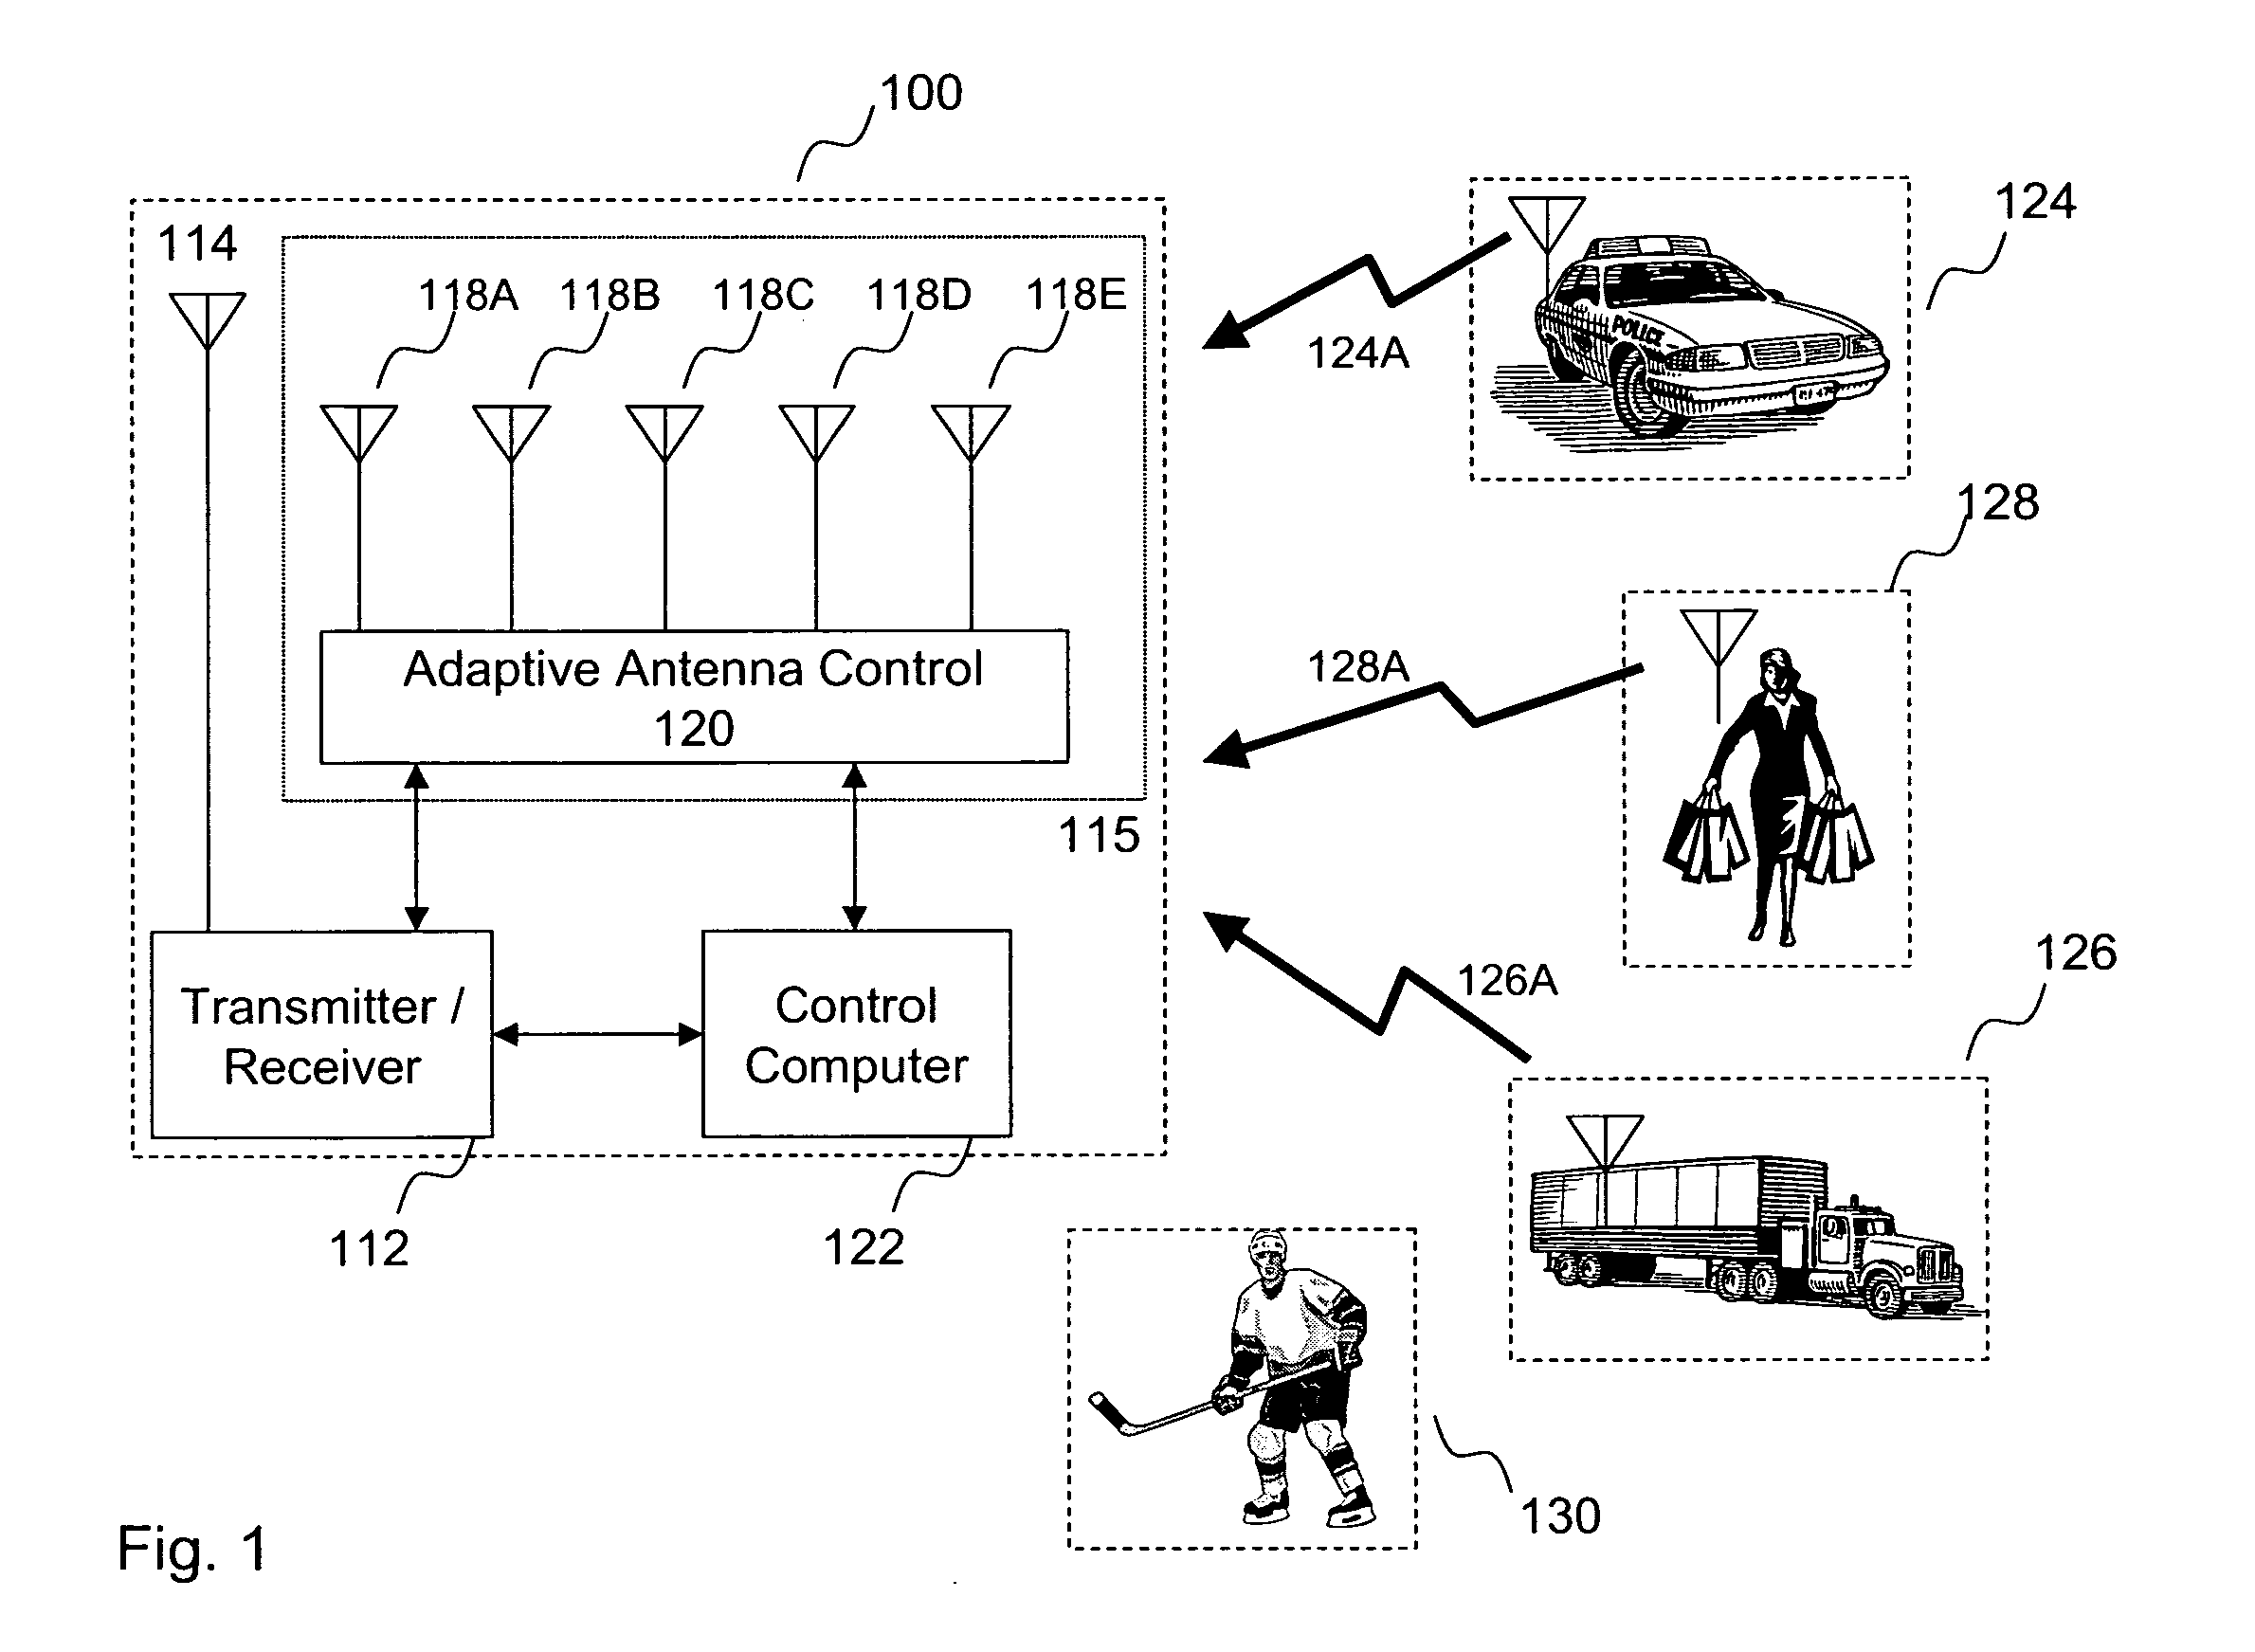 Tone based cognitive radio for opportunistic communications